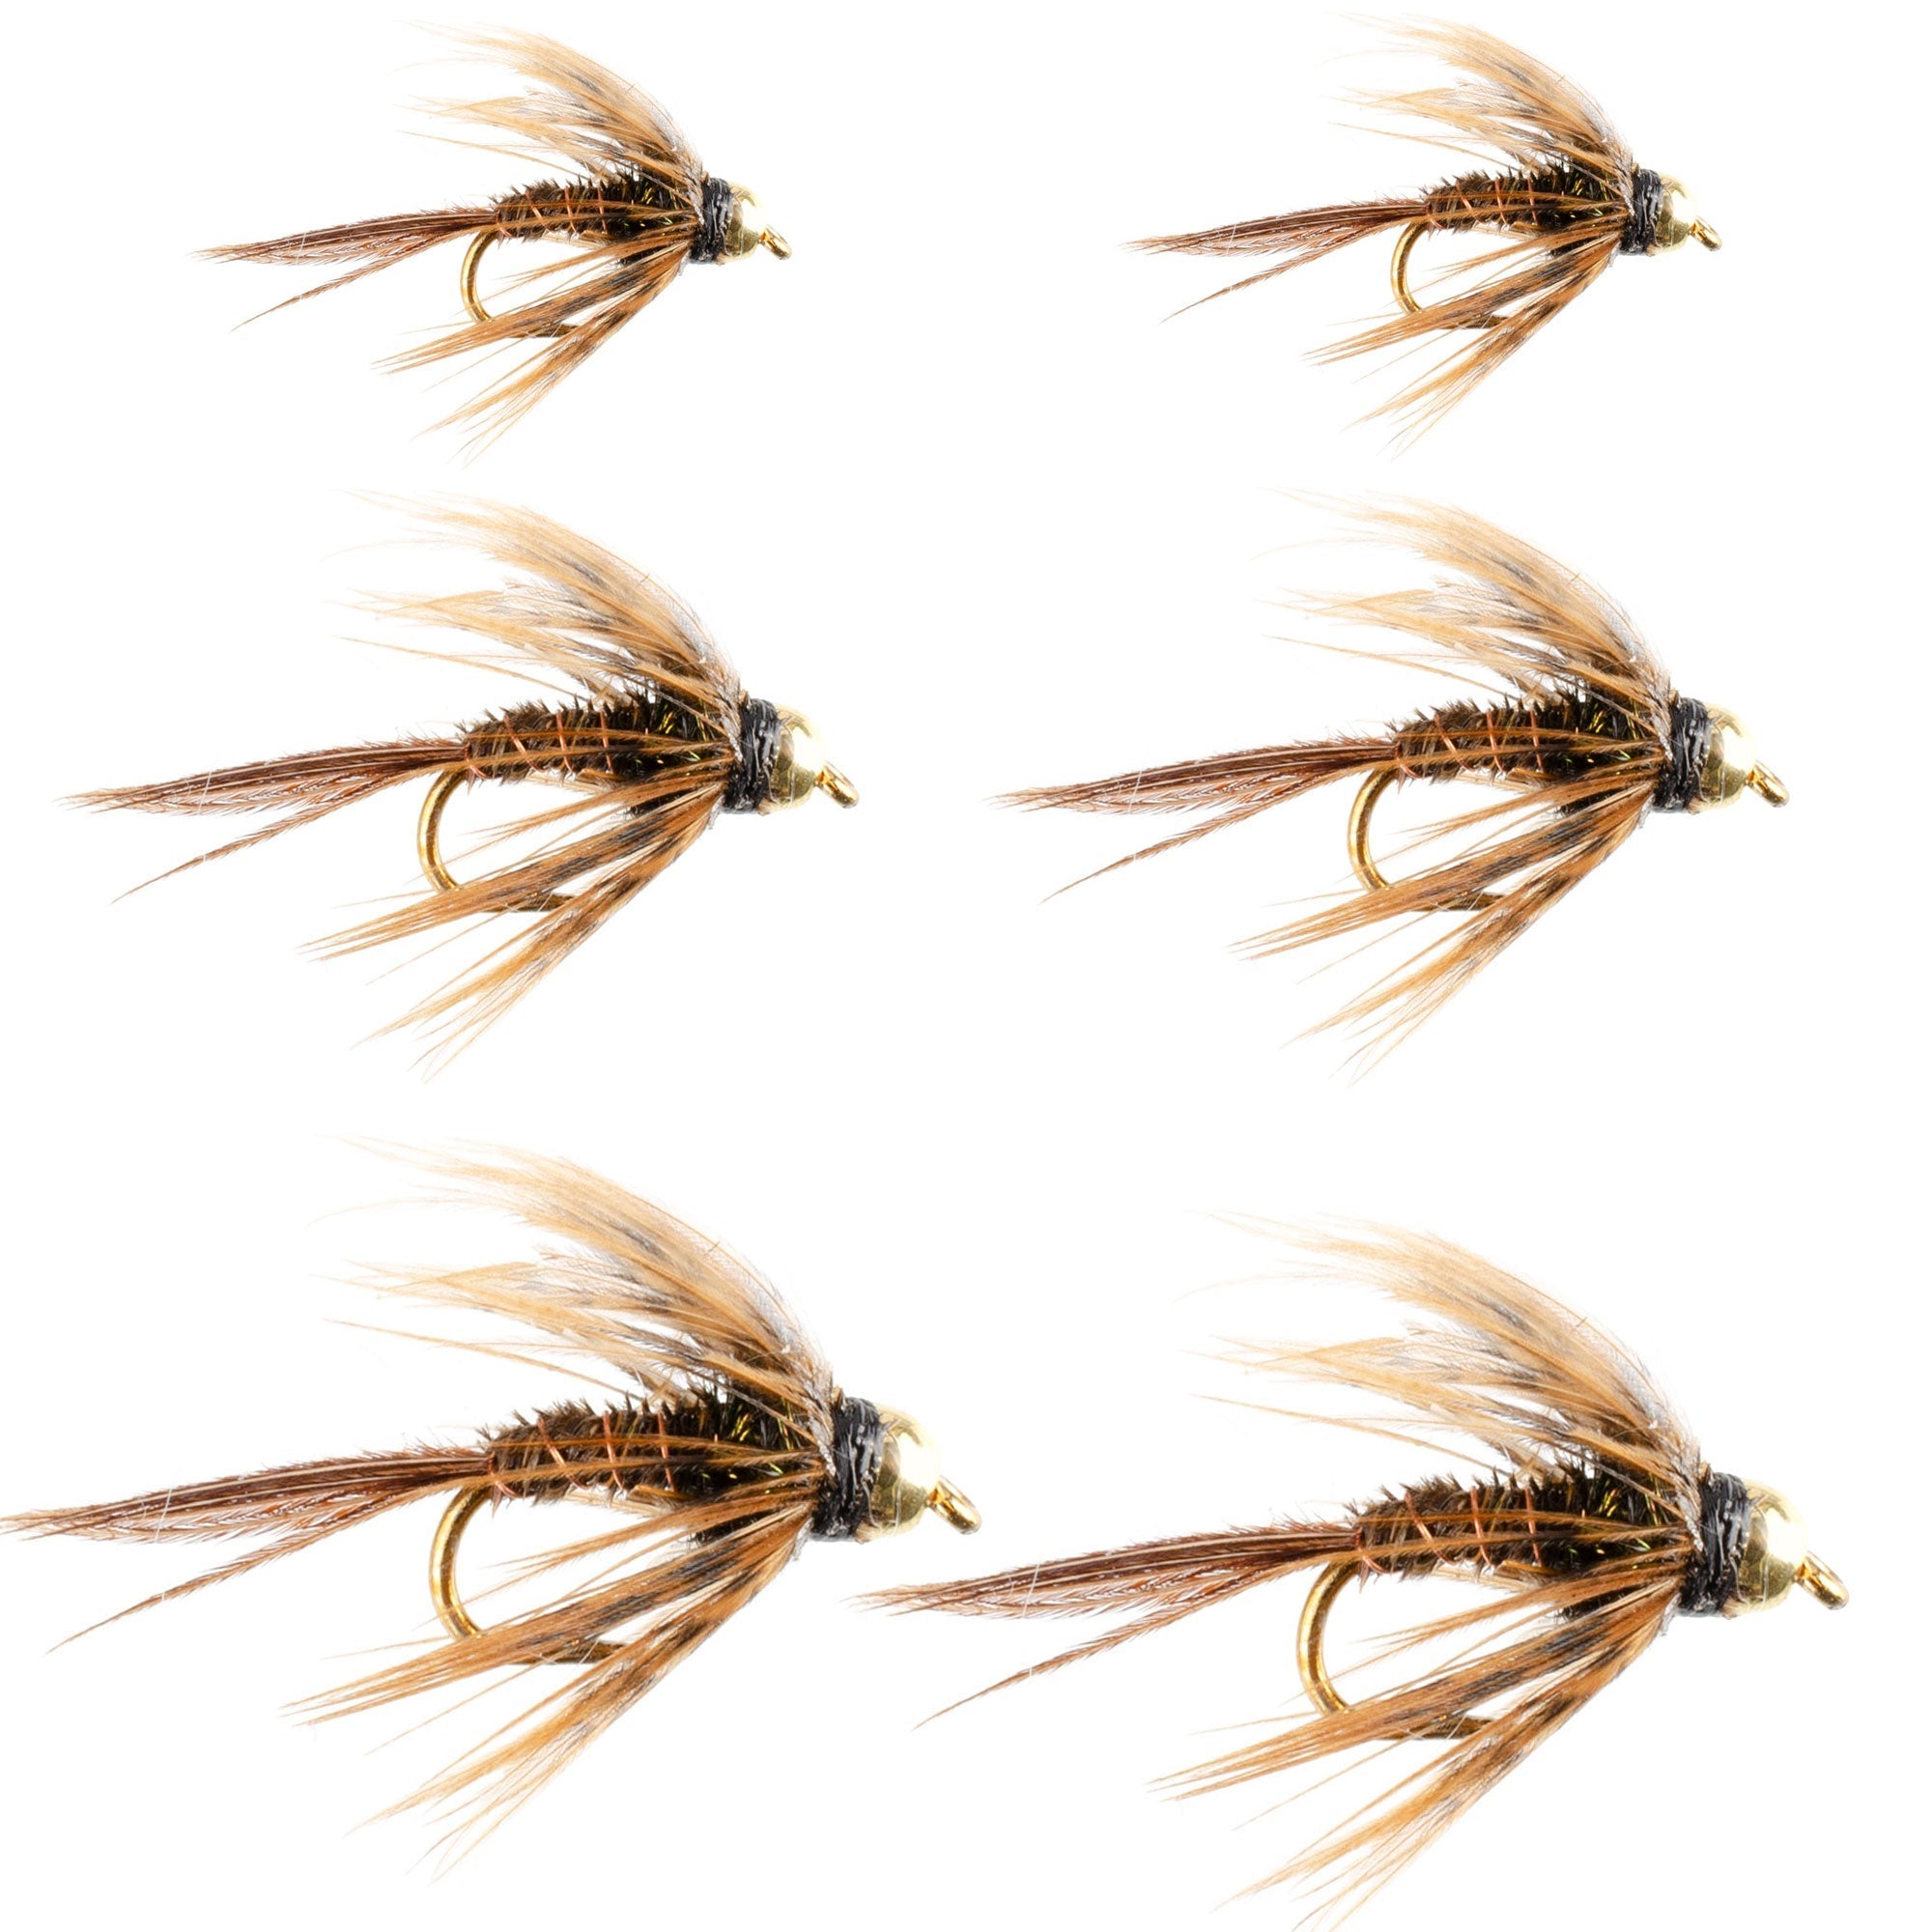 Soft Hackle Bead Head Pheasant Tail Nymph Fly Fishing Flies - 6 Flies Hook Size 16